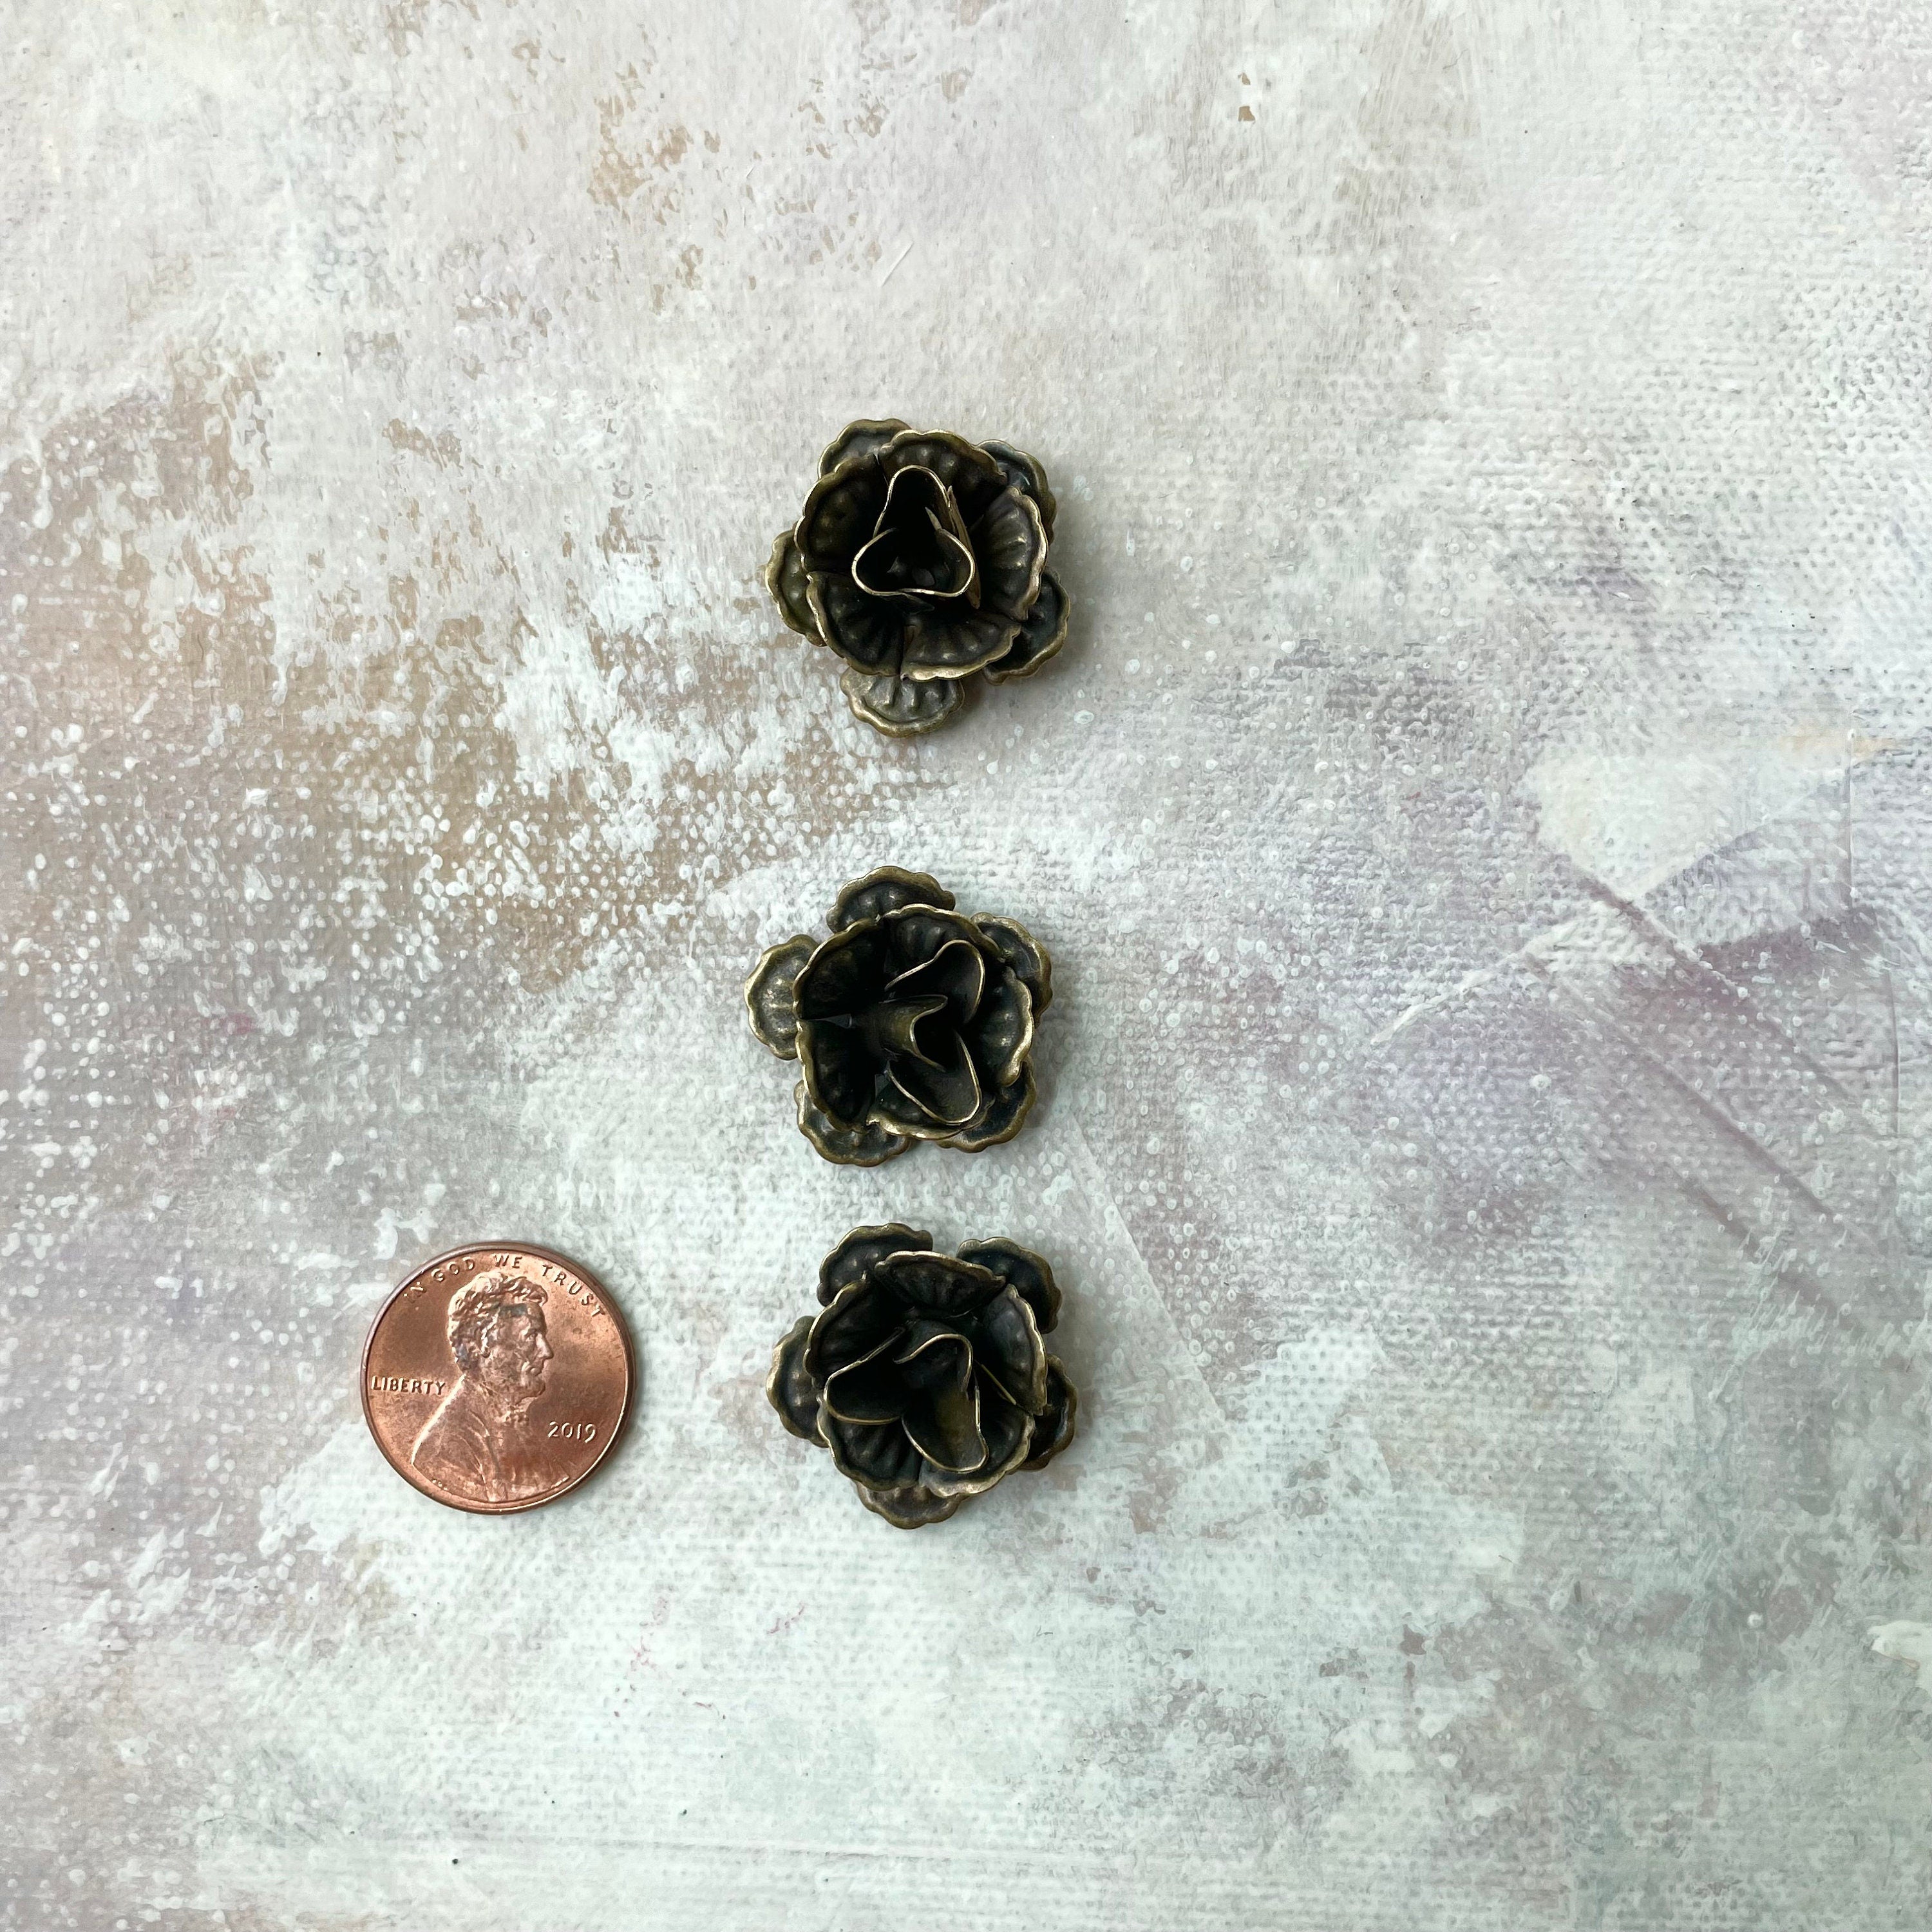 3 mini bronze styling flowers with penny beside for size reference - Flat lay props from Champagne & GRIT 